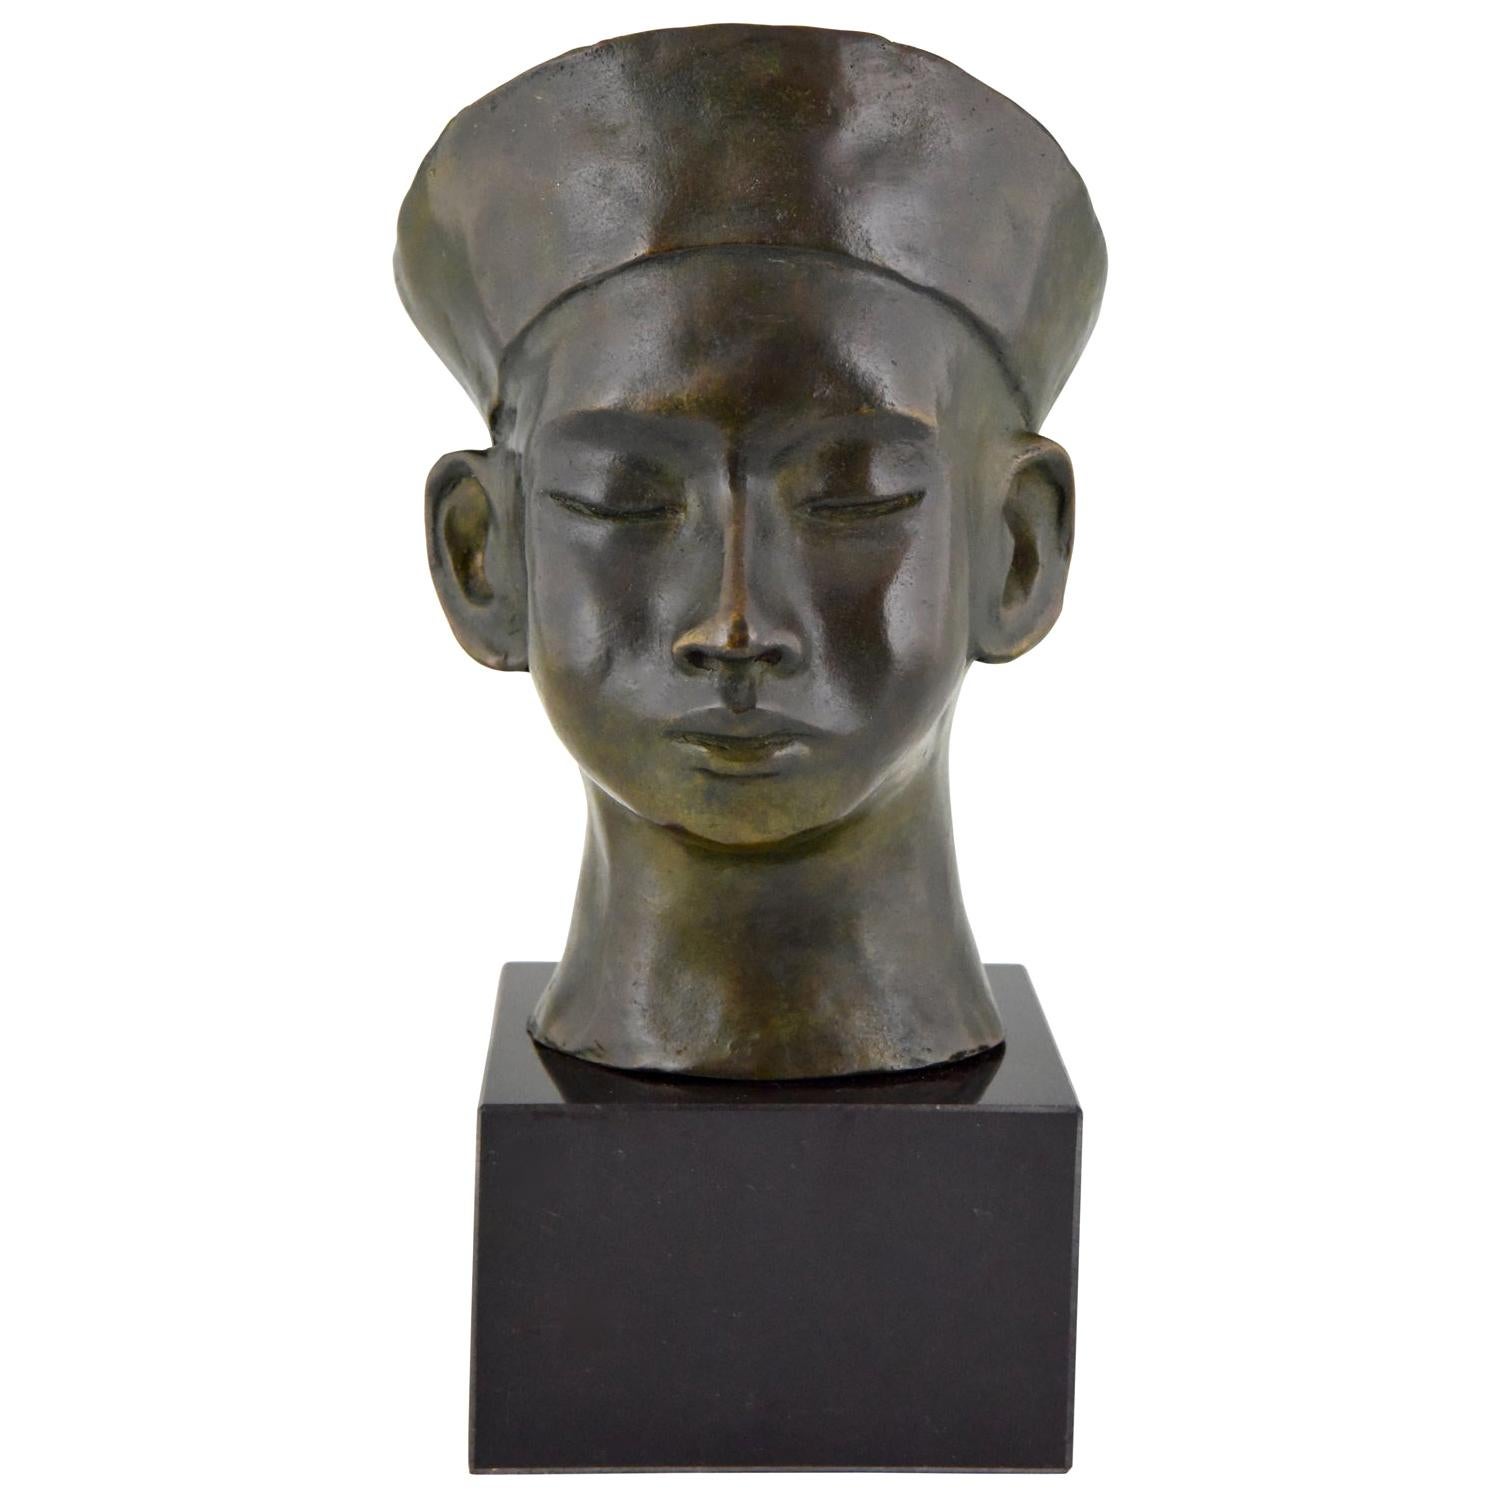 Art Deco Bronze Bust Chinese Boy with Hat and Braid. C. Le Van  1930